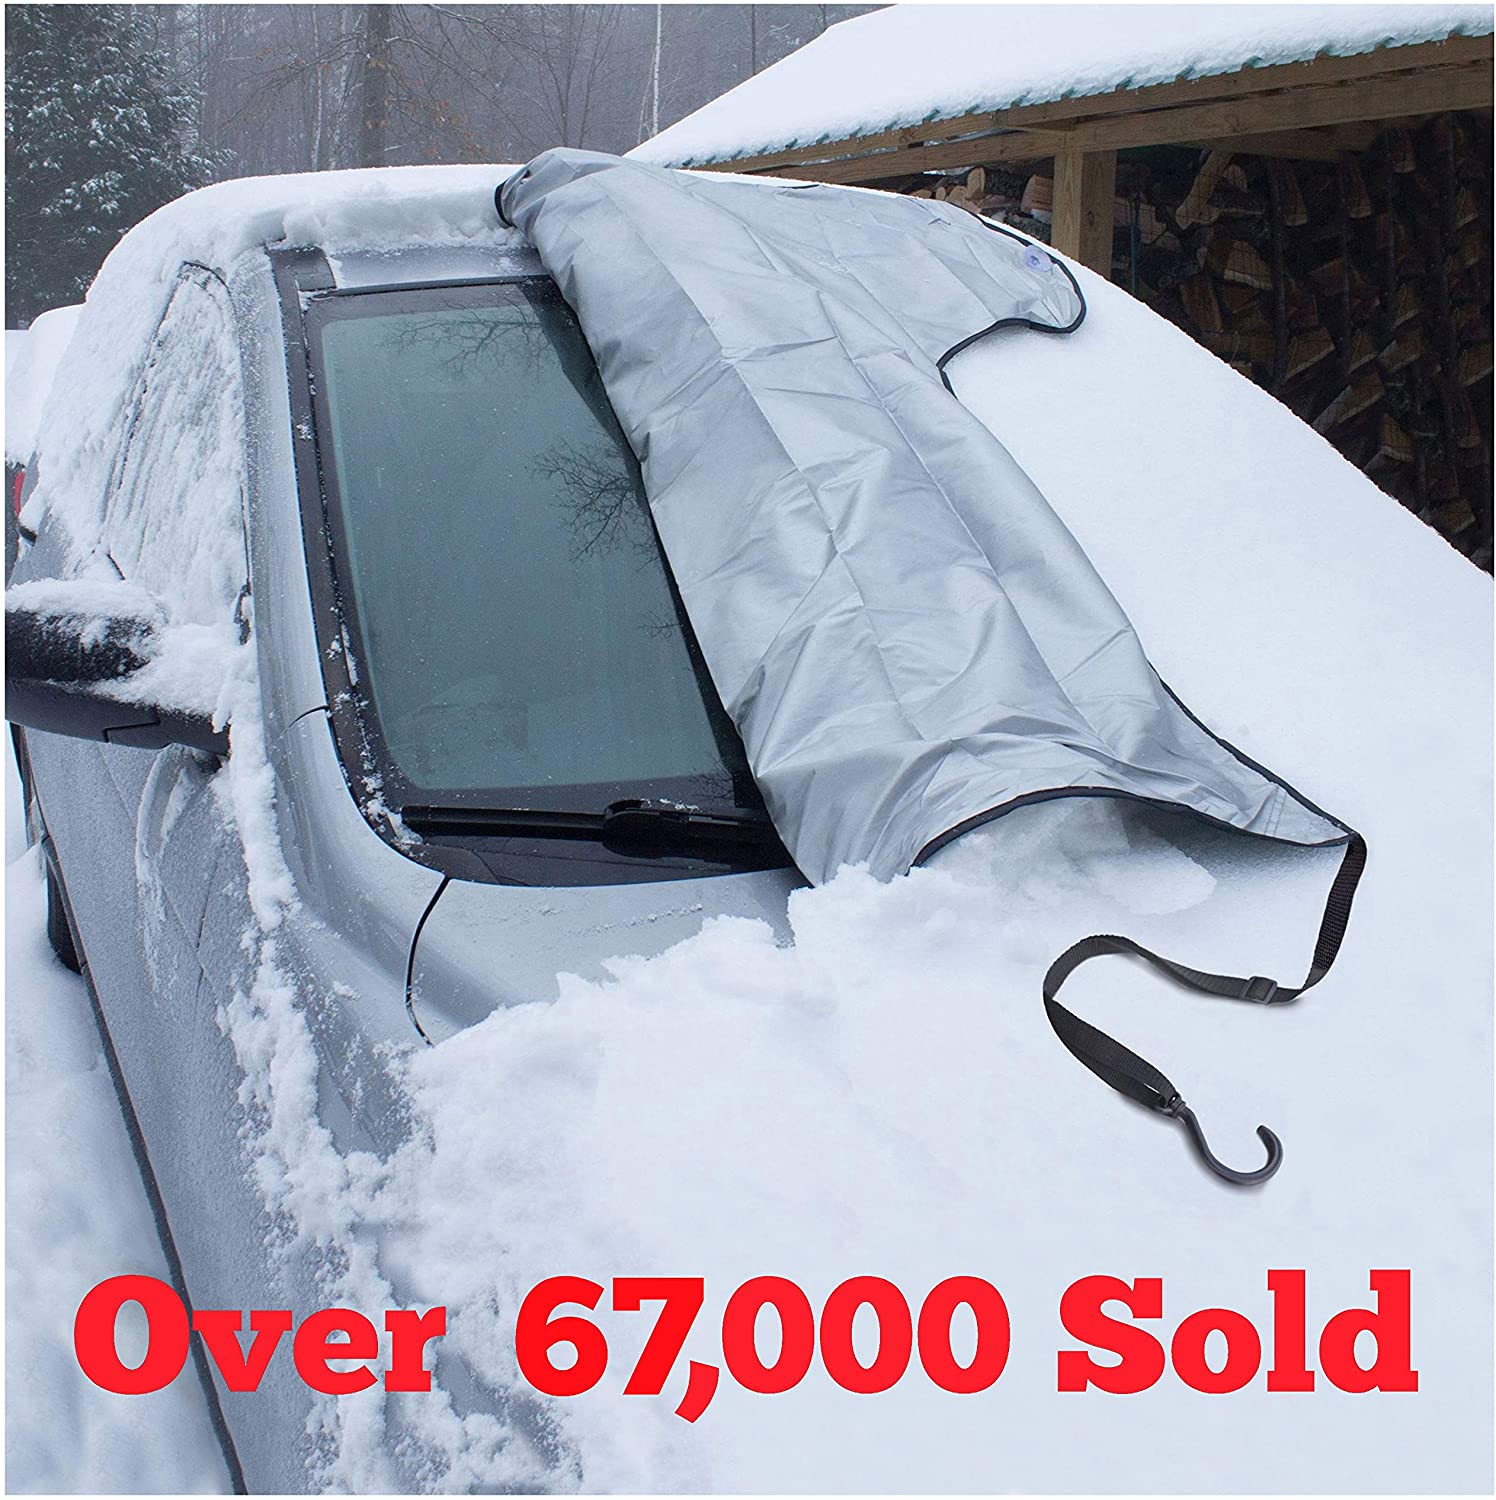 98 Inch x 62 Inch Ice and Frost Universal Fit Car Windshield Snow Cover for Protect Windshield and Mirror from Snow Delixike Car Snow Cover 